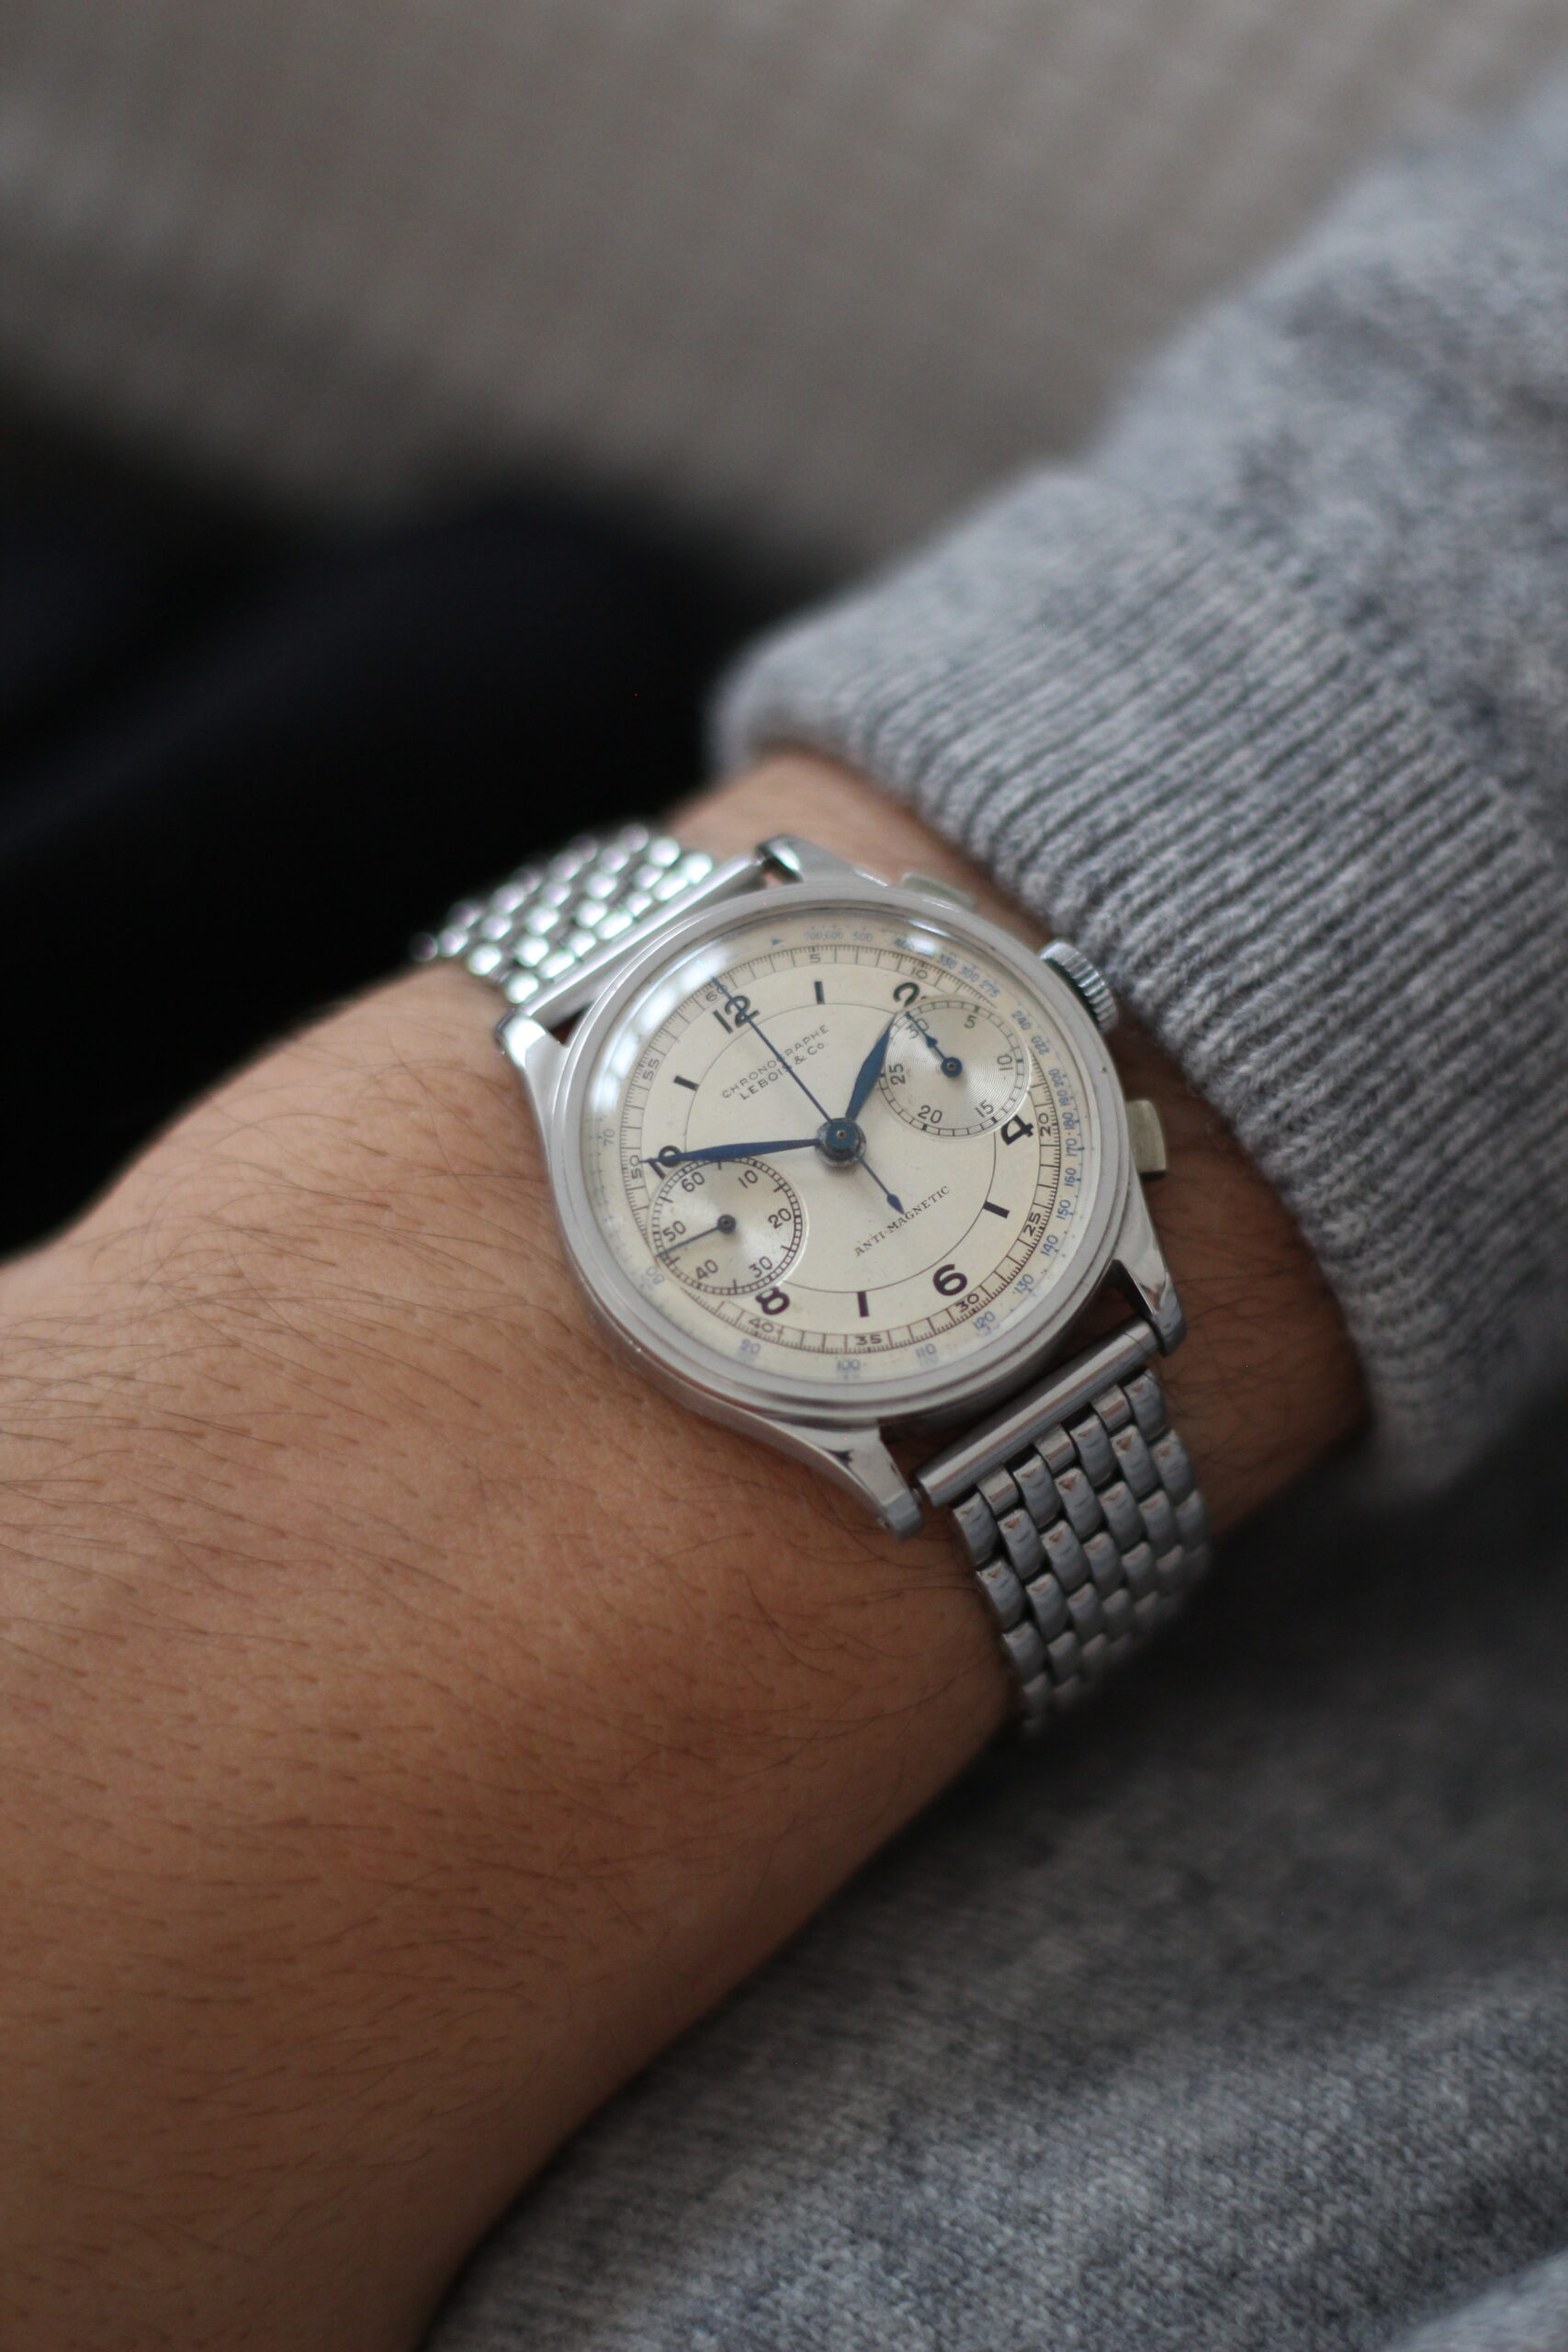 Cultivating Community Through Lebois & Co’s Heritage Chronograph